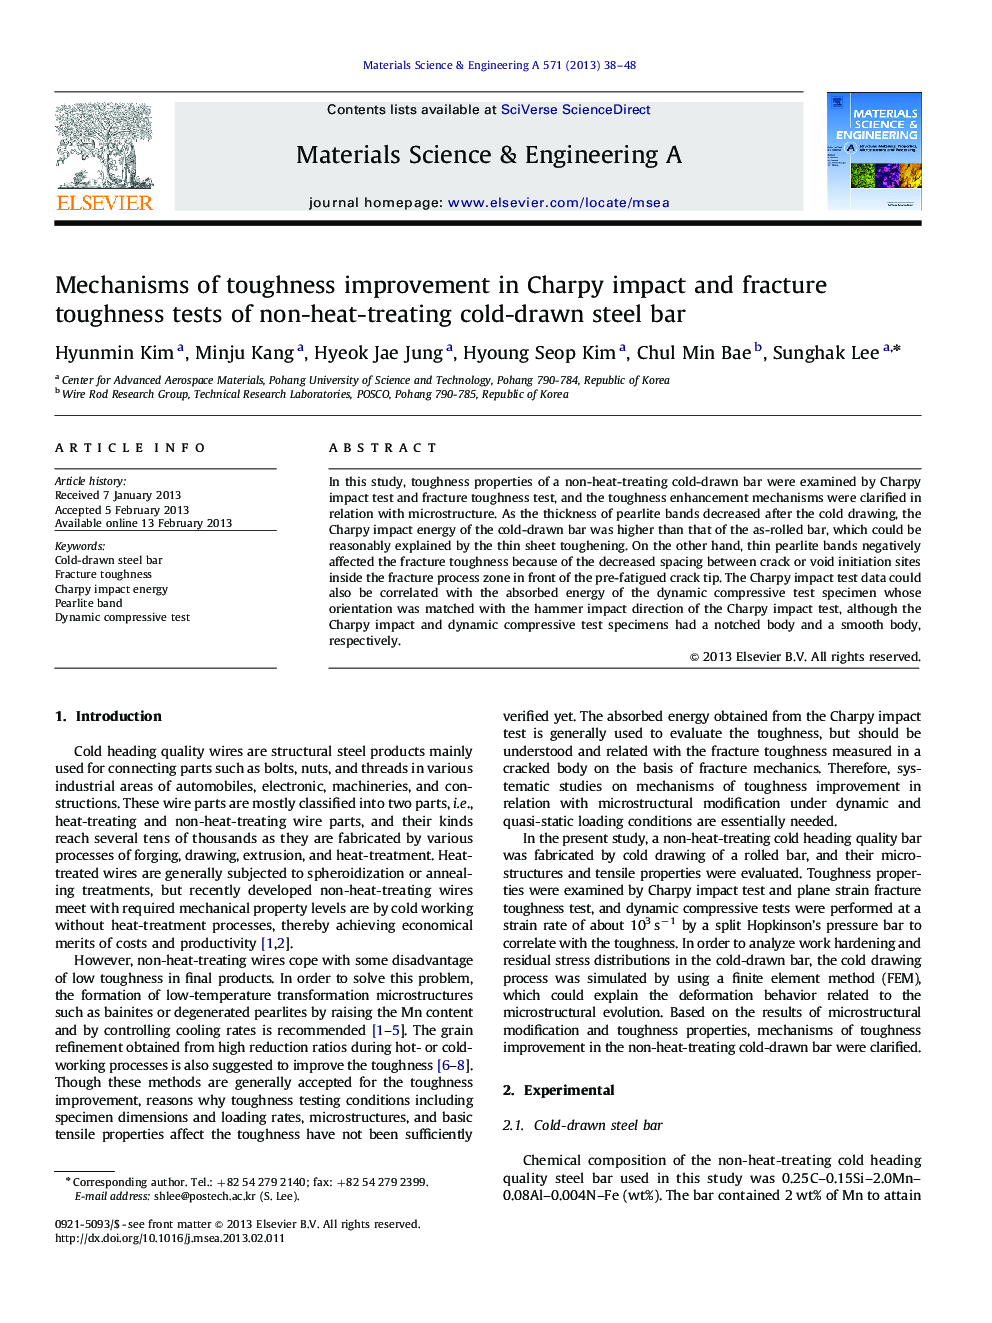 Mechanisms of toughness improvement in Charpy impact and fracture toughness tests of non-heat-treating cold-drawn steel bar